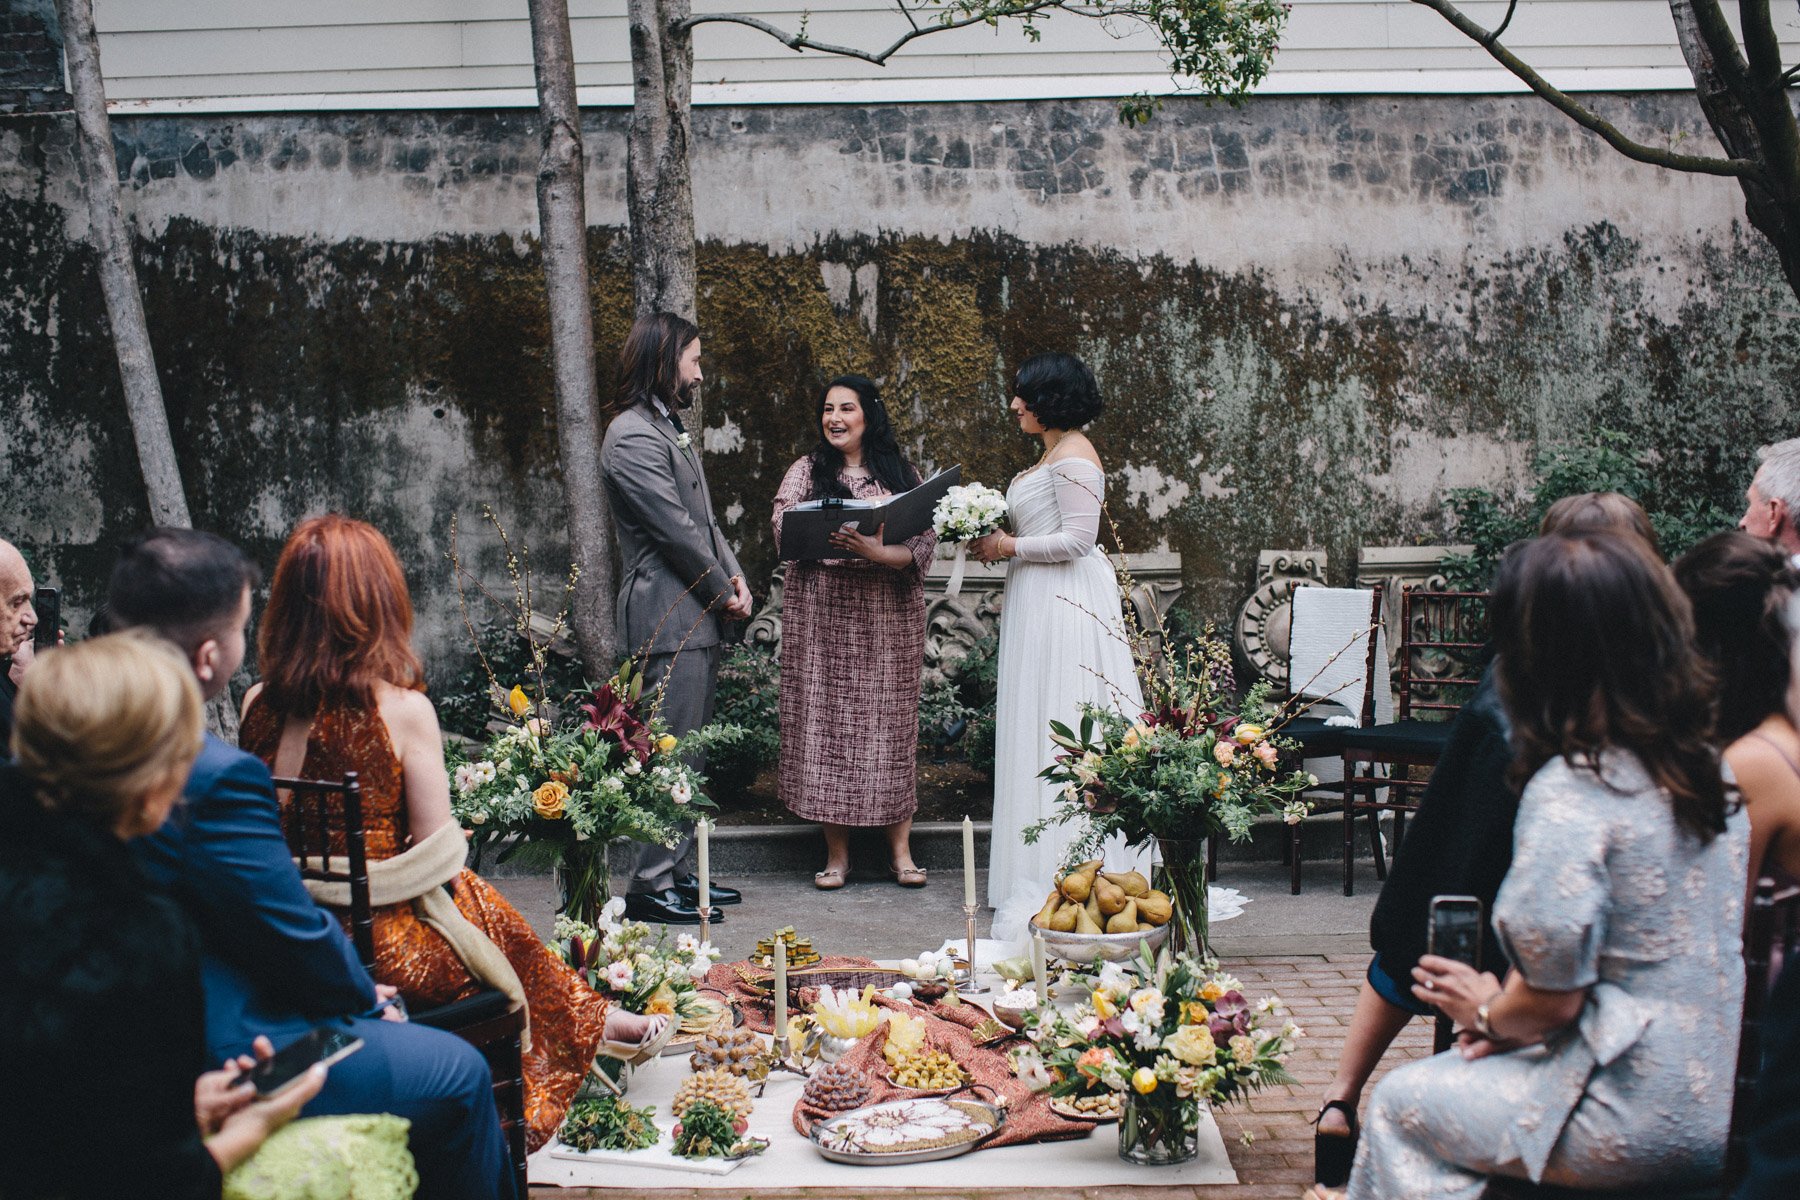 Persian wedding ceremony at Haas-Lilienthal House